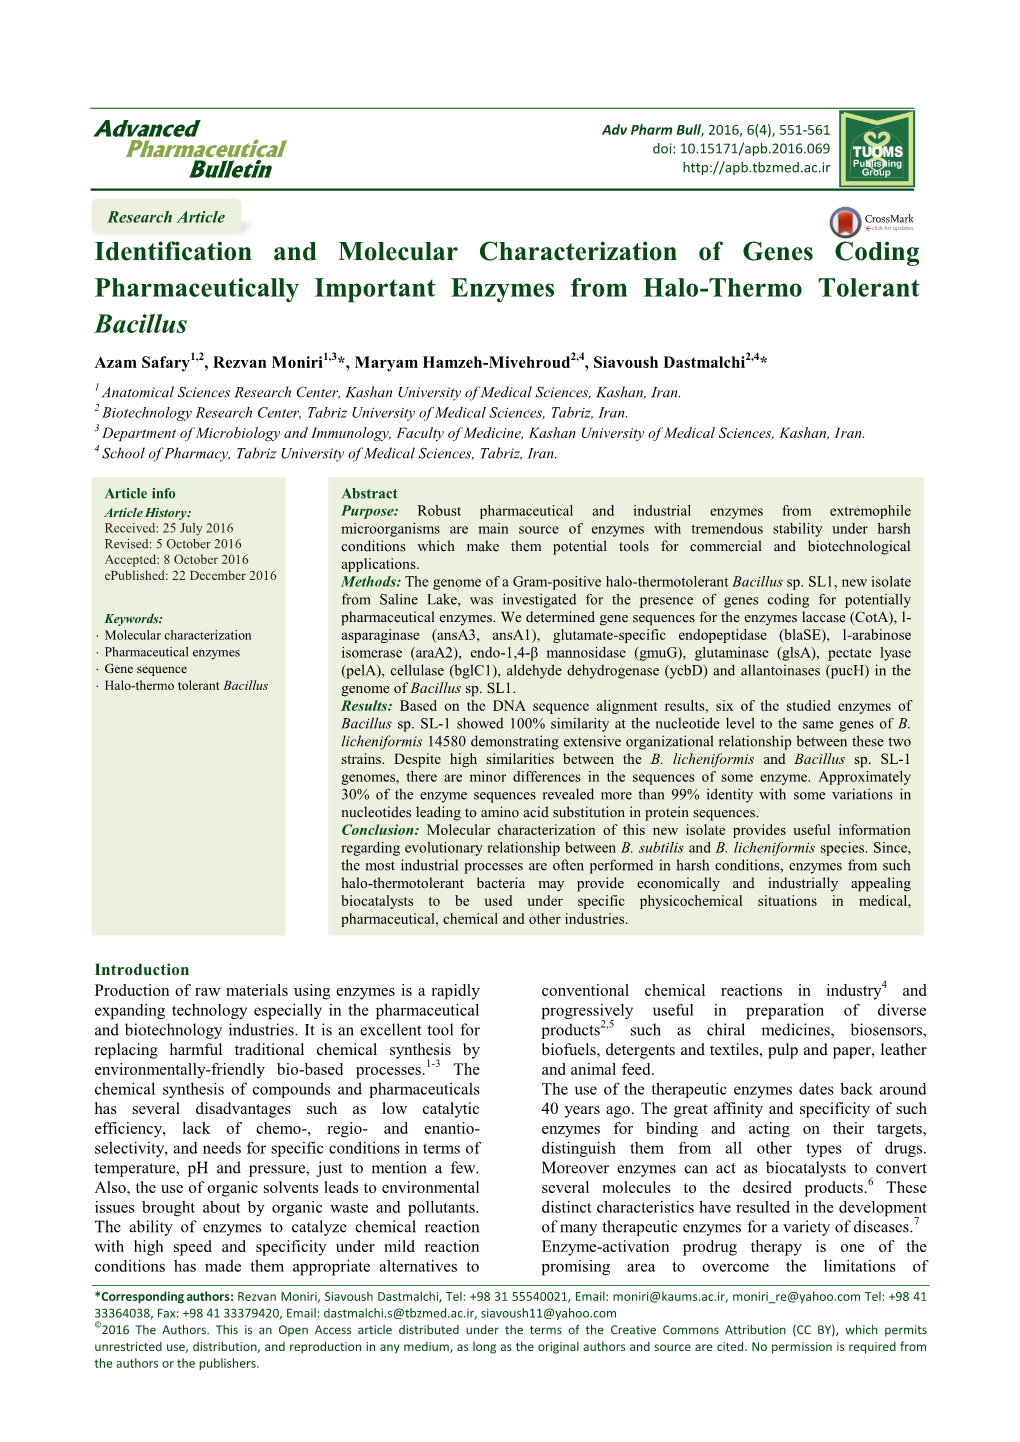 Identification and Molecular Characterization of Genes Coding